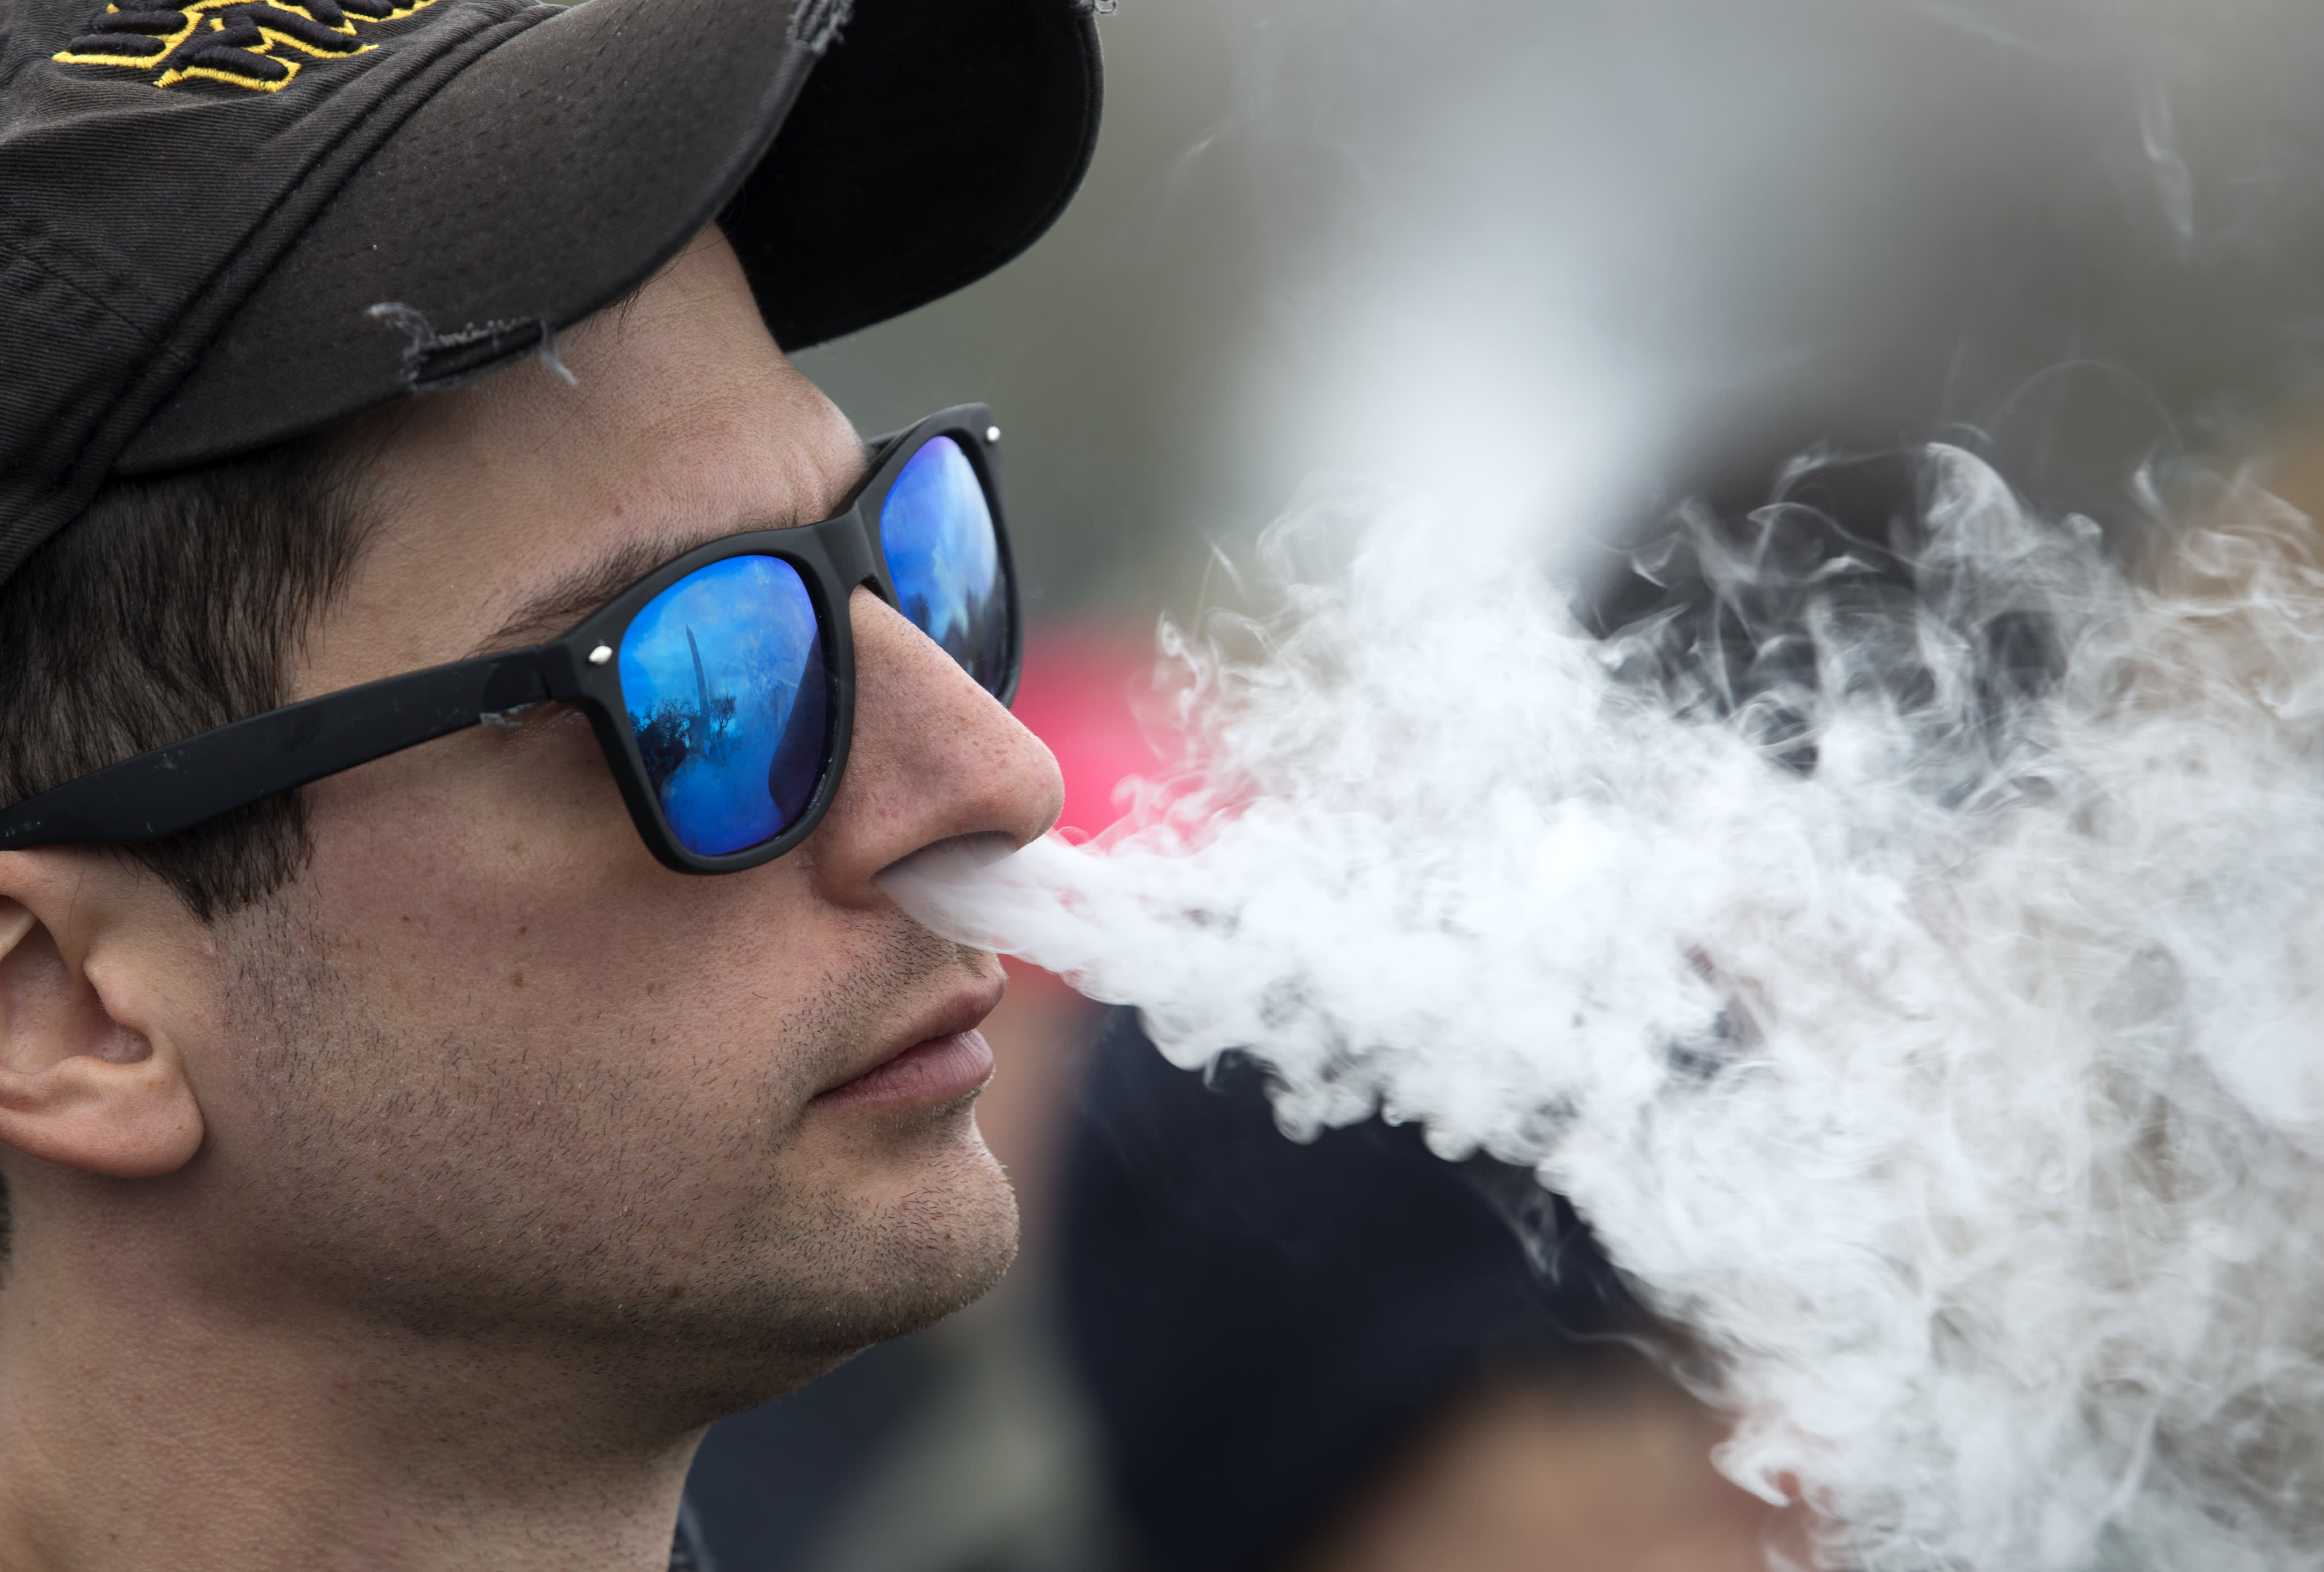 FDA approves Vuse vaping products for sale marking a first for the e-cigarette industry – CNBC